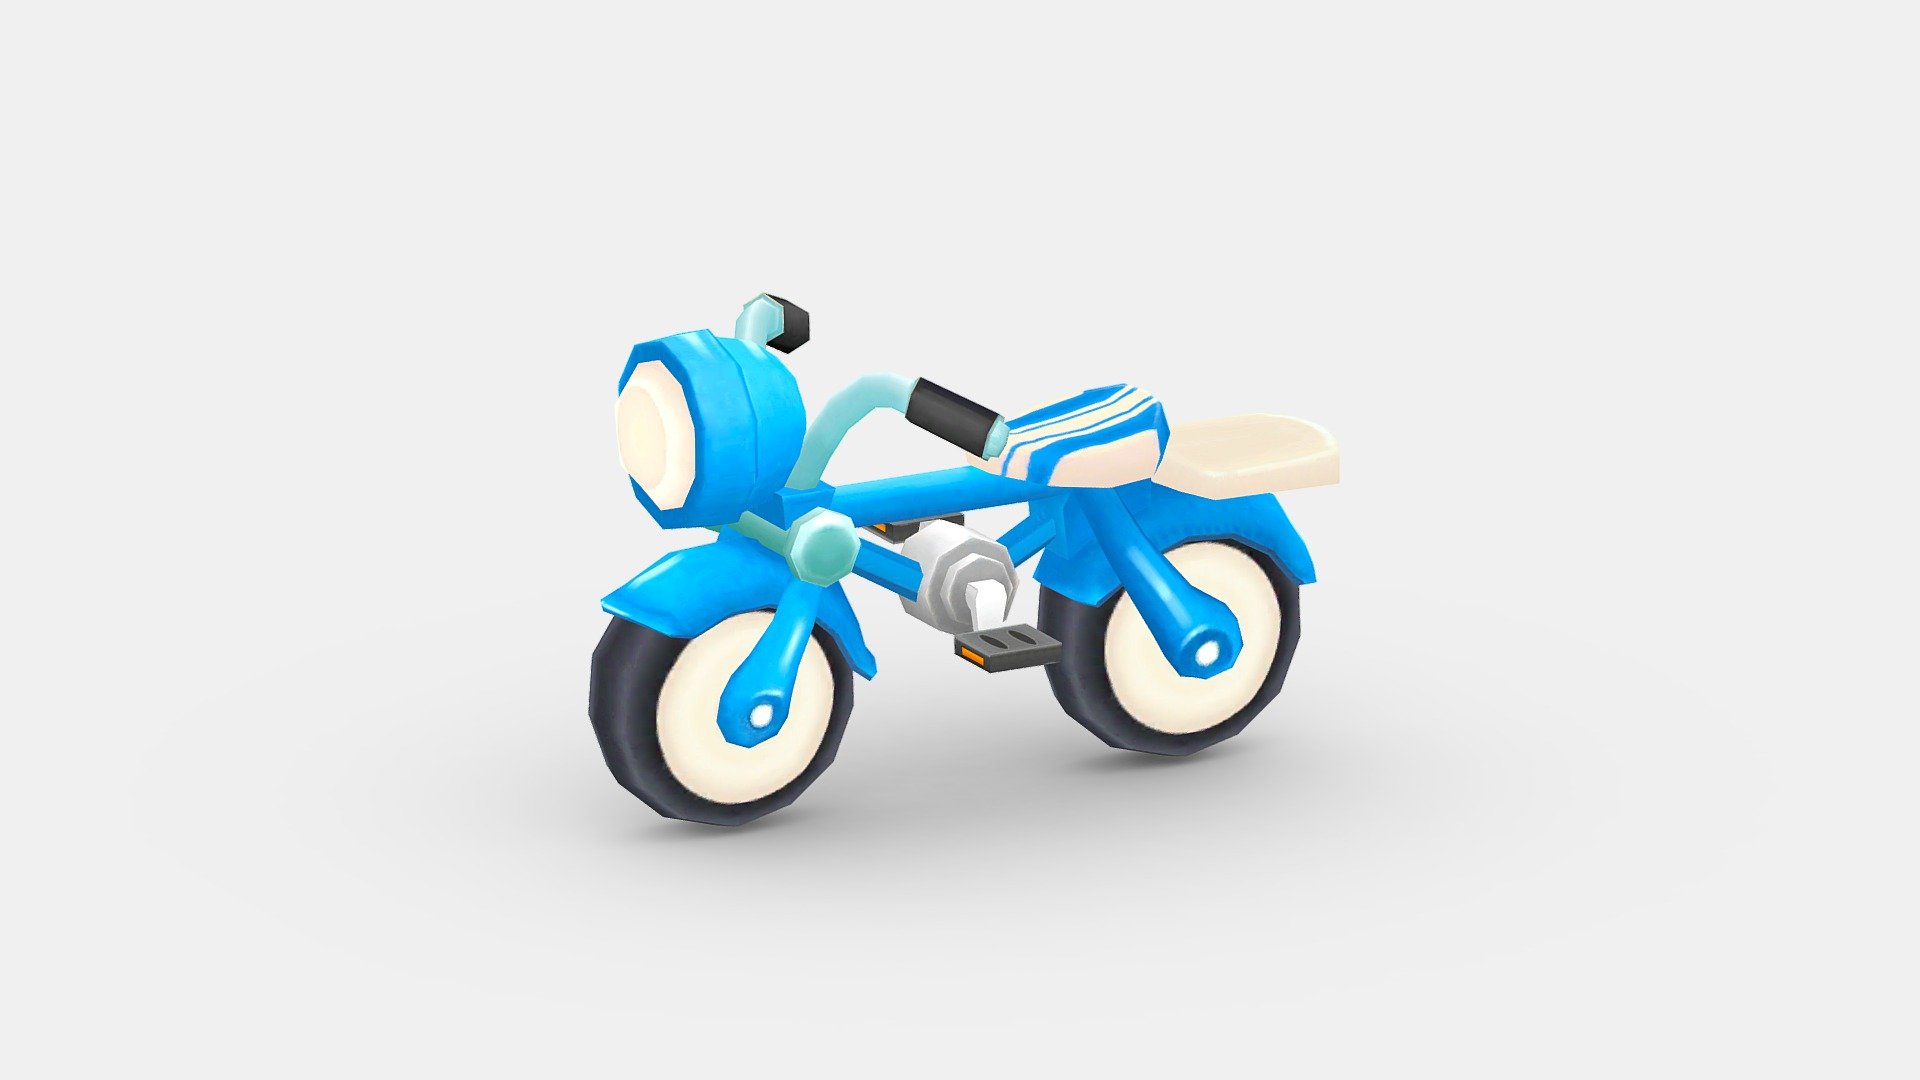 File contains : 2 Texture + 1 Model

Texture1= blue=for boy

Texture2= red =for girl - Cartoon kids bicycles - Buy Royalty Free 3D model by ler_cartoon (@lerrrrr) 3d model